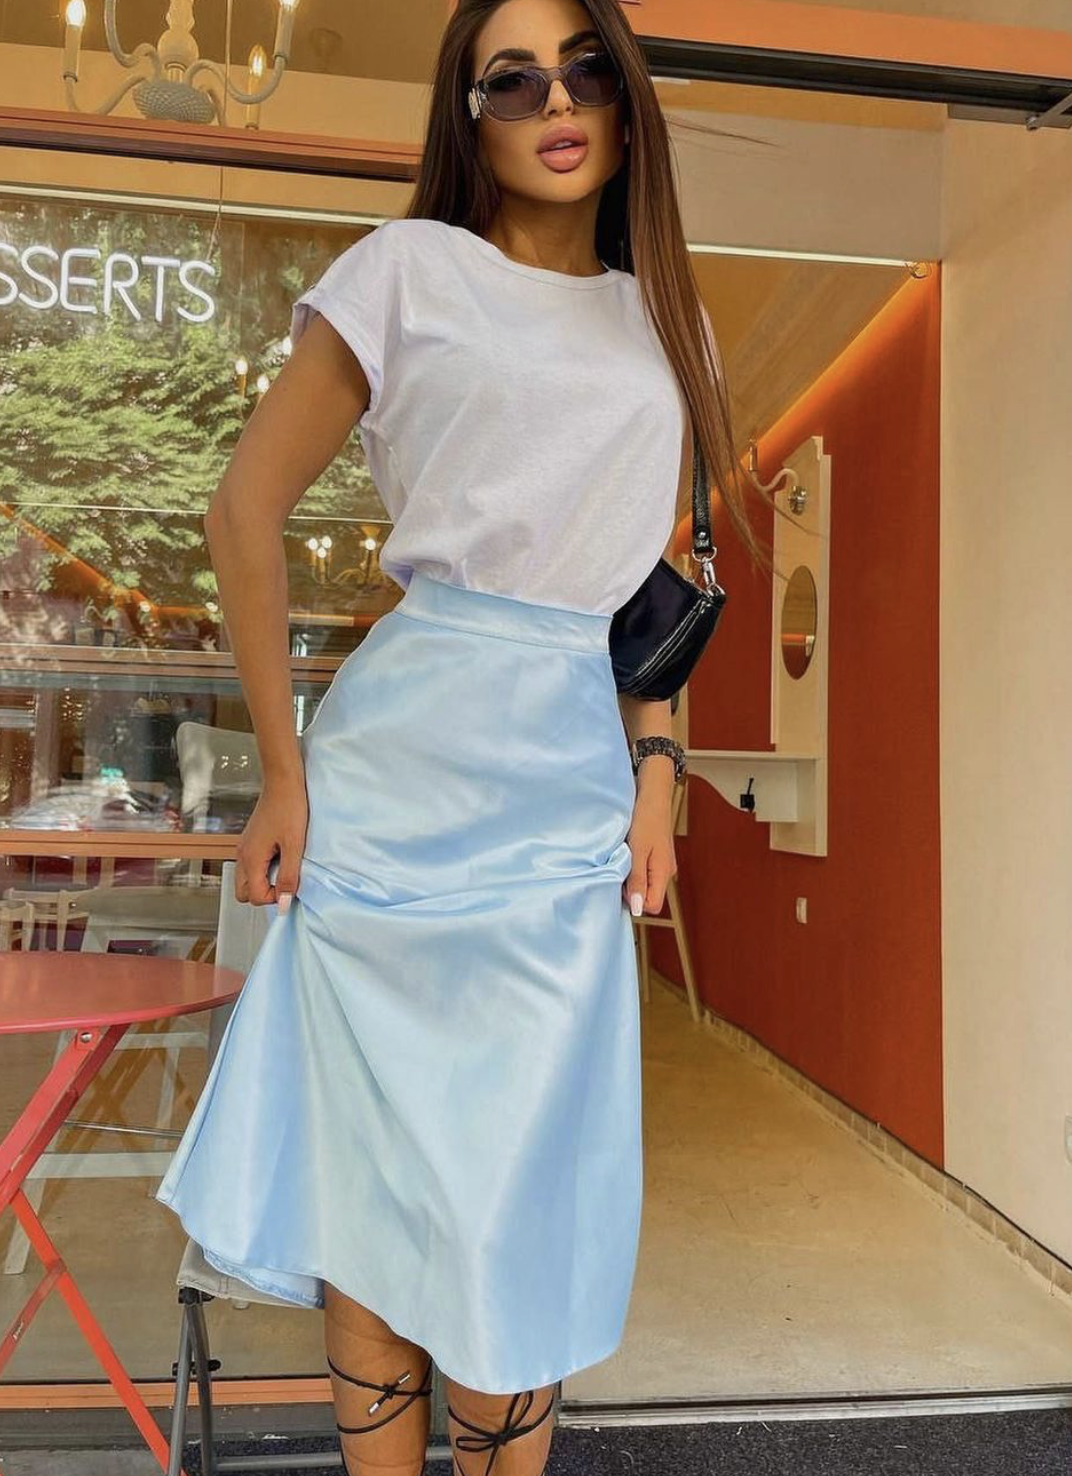 A classic T-shirt and midi skirt is a great look.